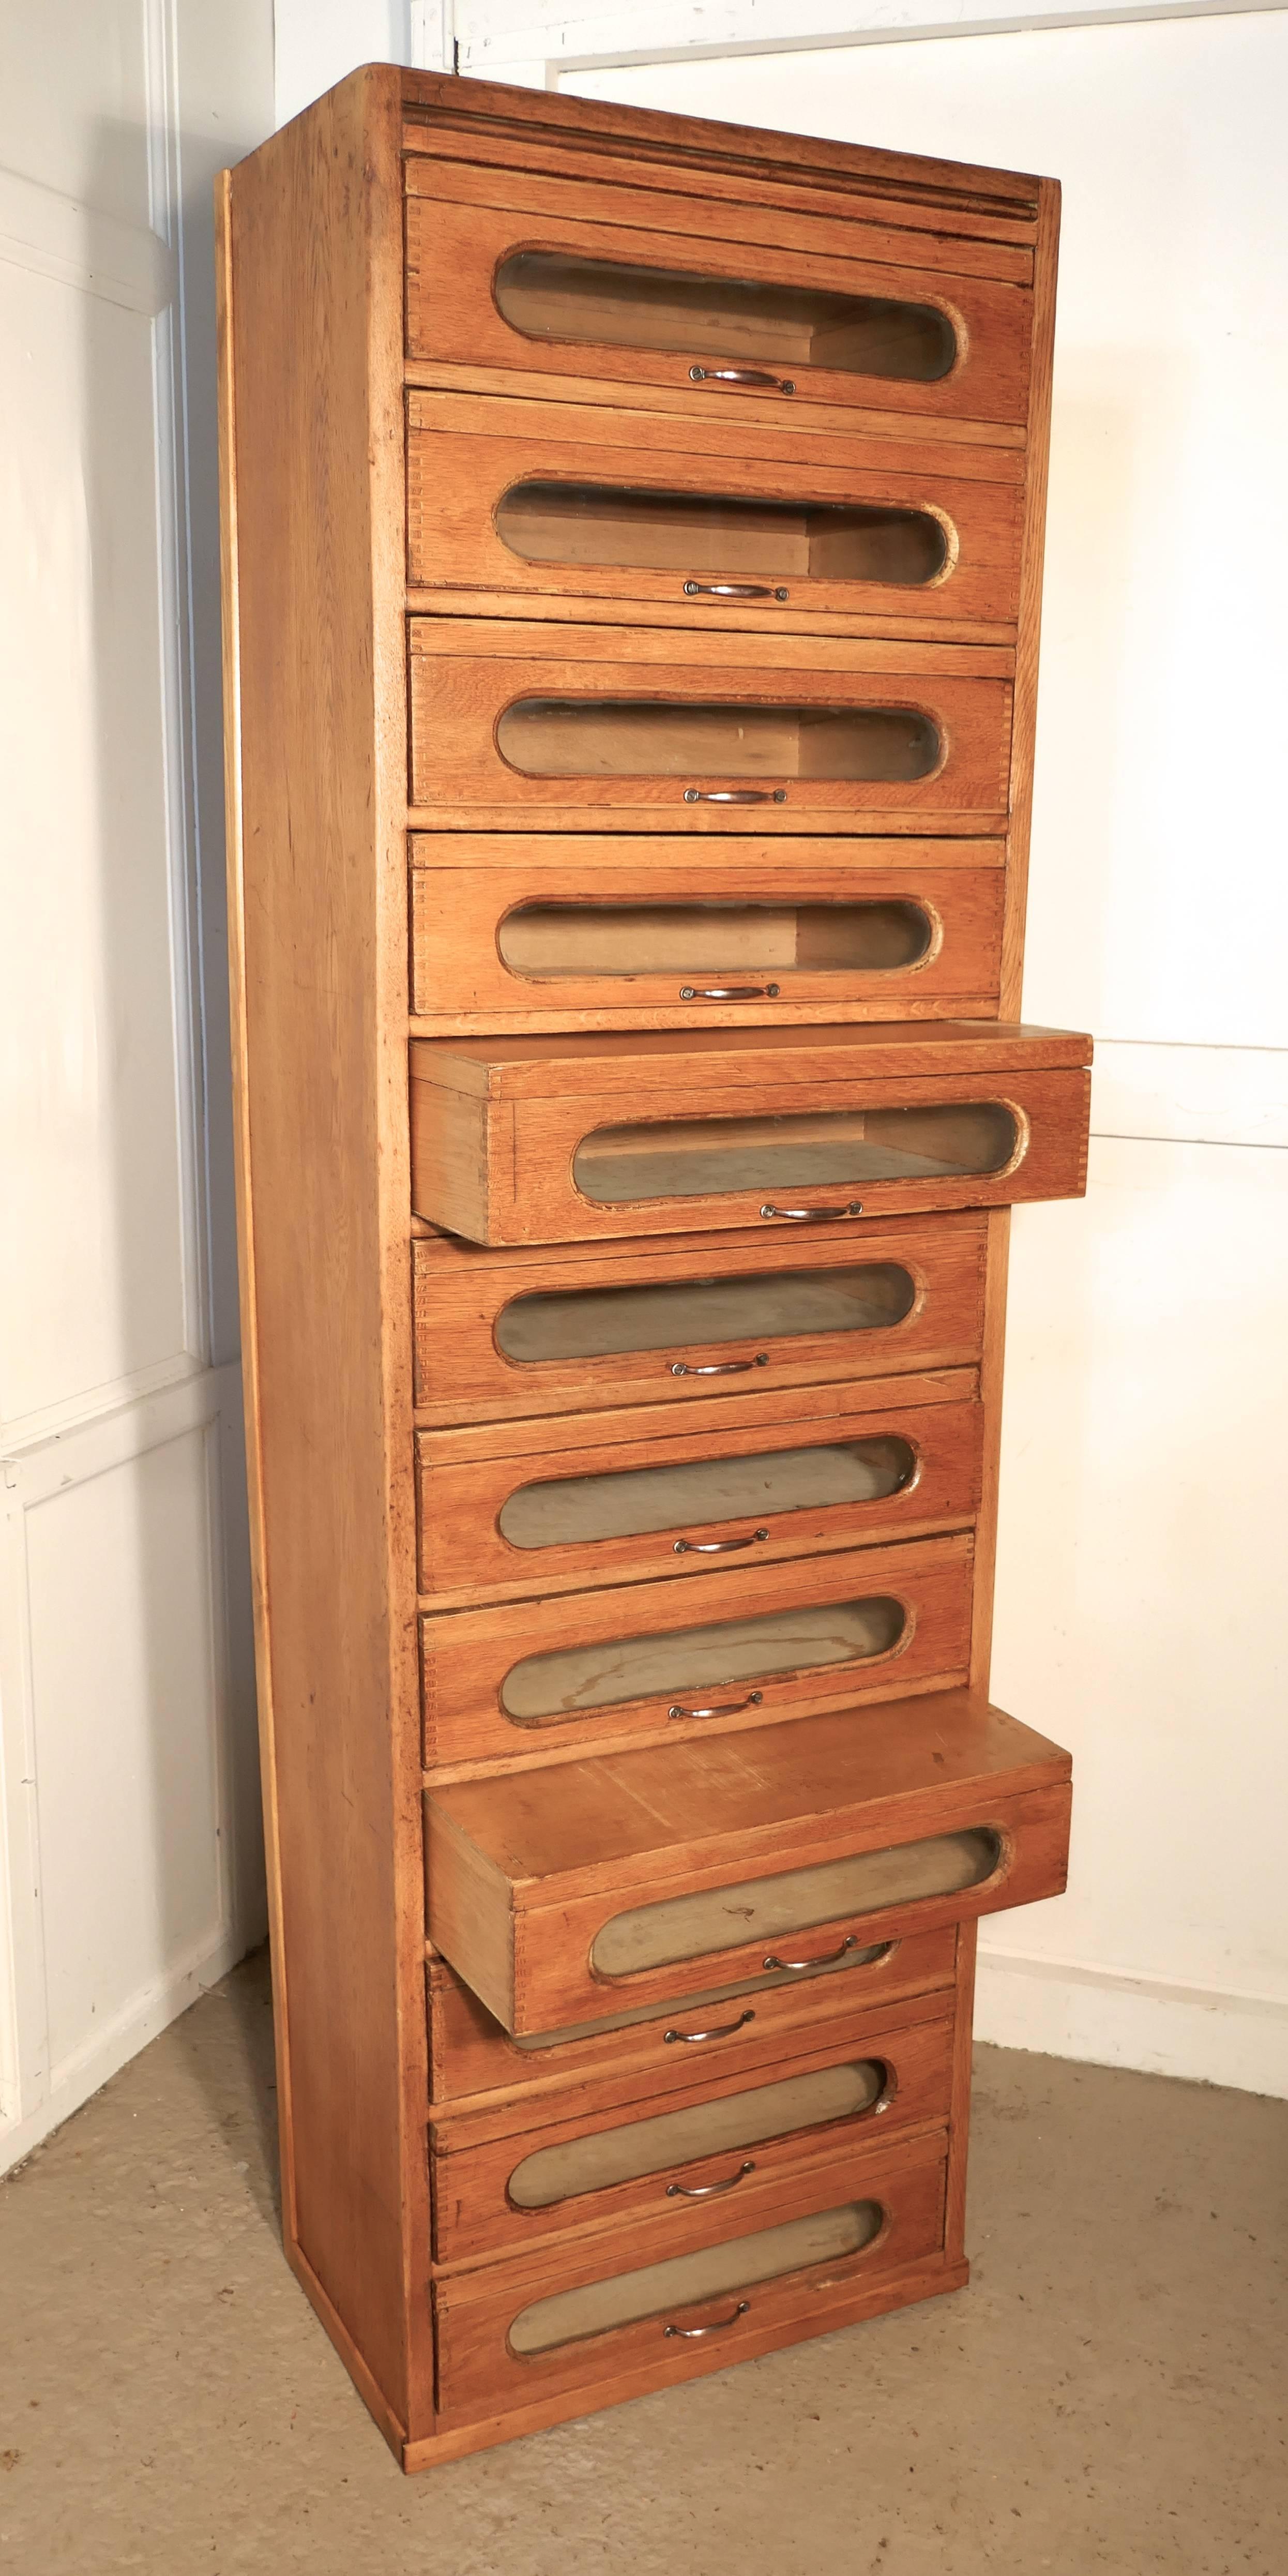 Oak Art Deco Tall Haberdashery Cabinet with Glass Fronted Lidded Drawers